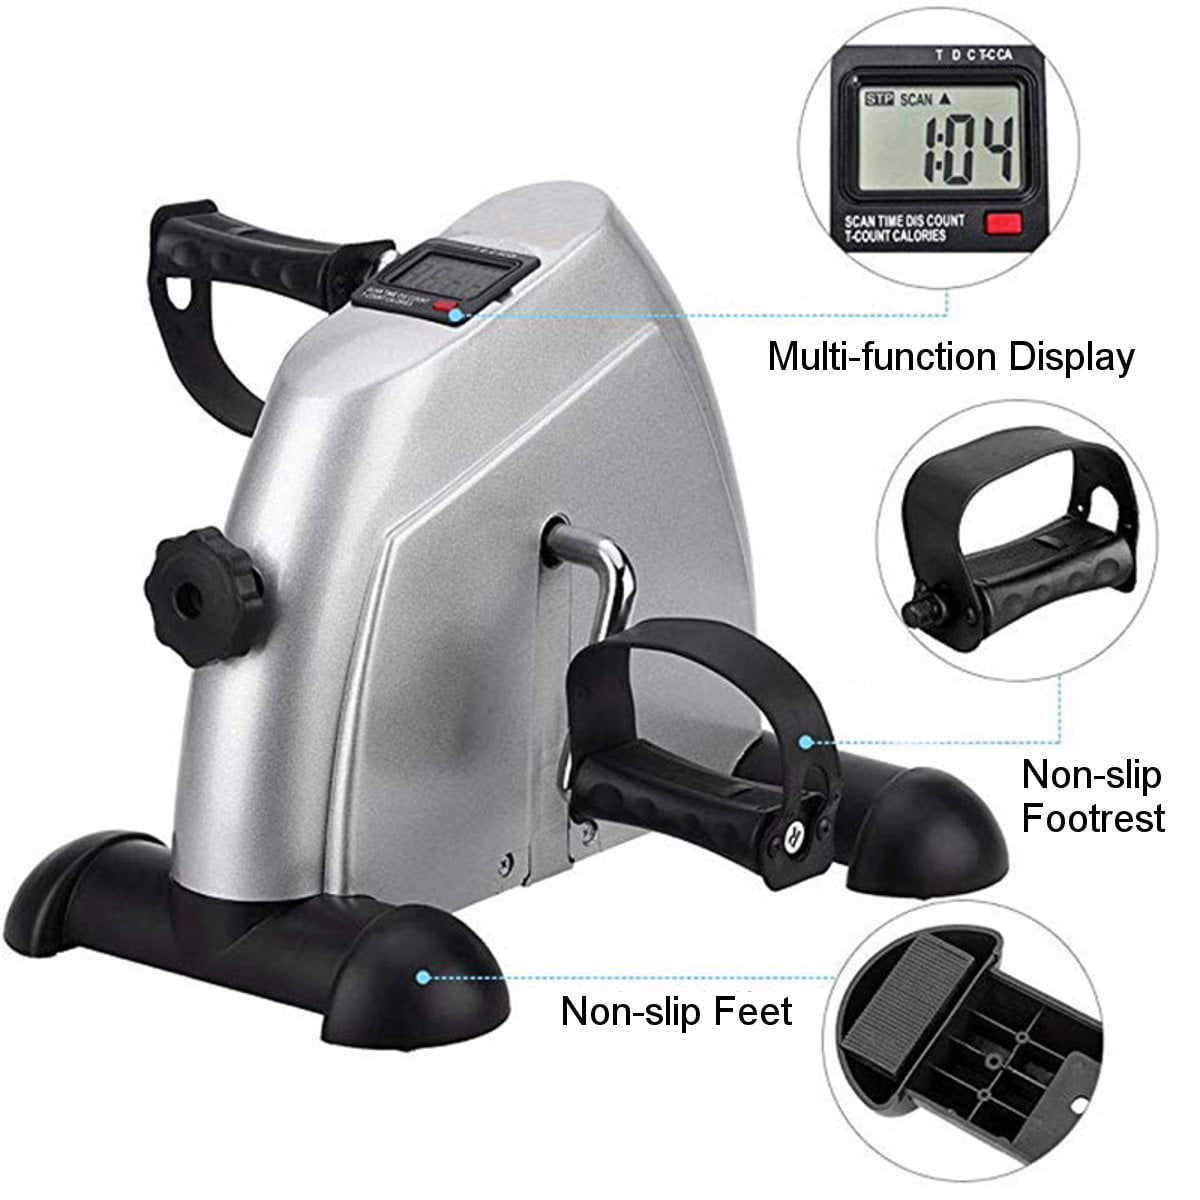 Folding Mini Exercise Bike Portable Home Pedal Exerciser Gym Fitness Leg Arm Cardio Training Adjustable Resistance with LCD Display